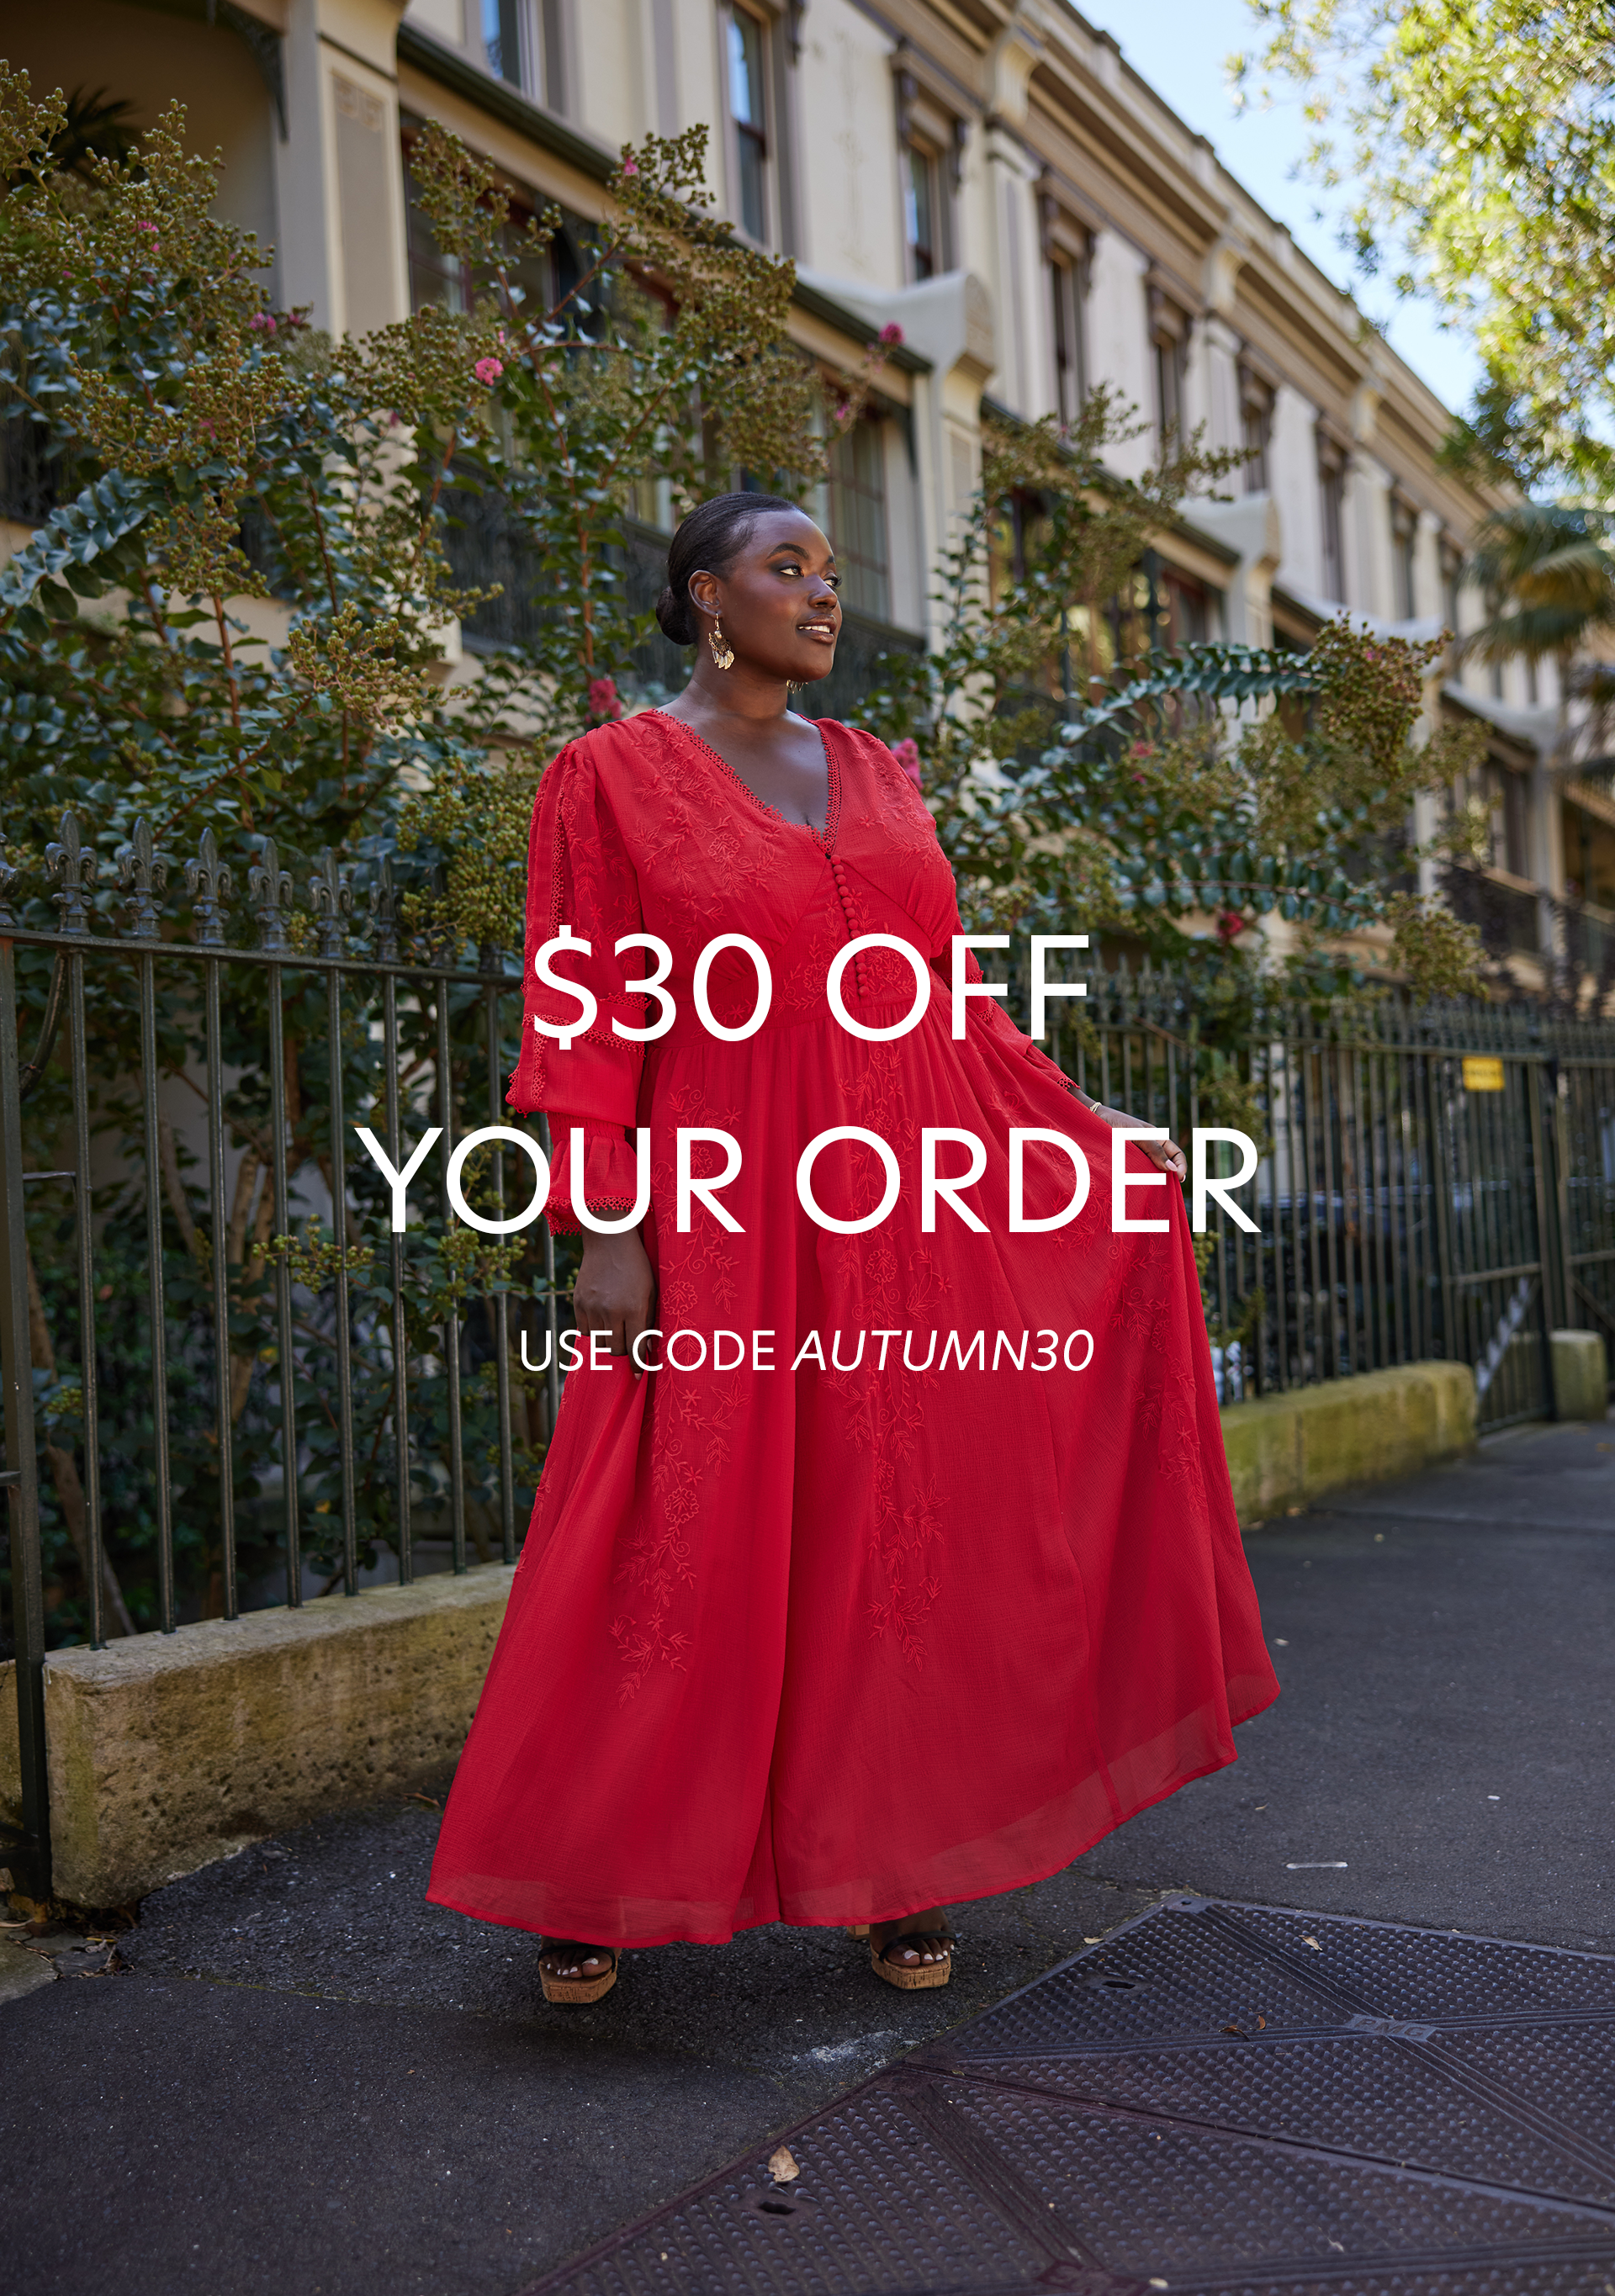 $30 OFF YOUR ORDER